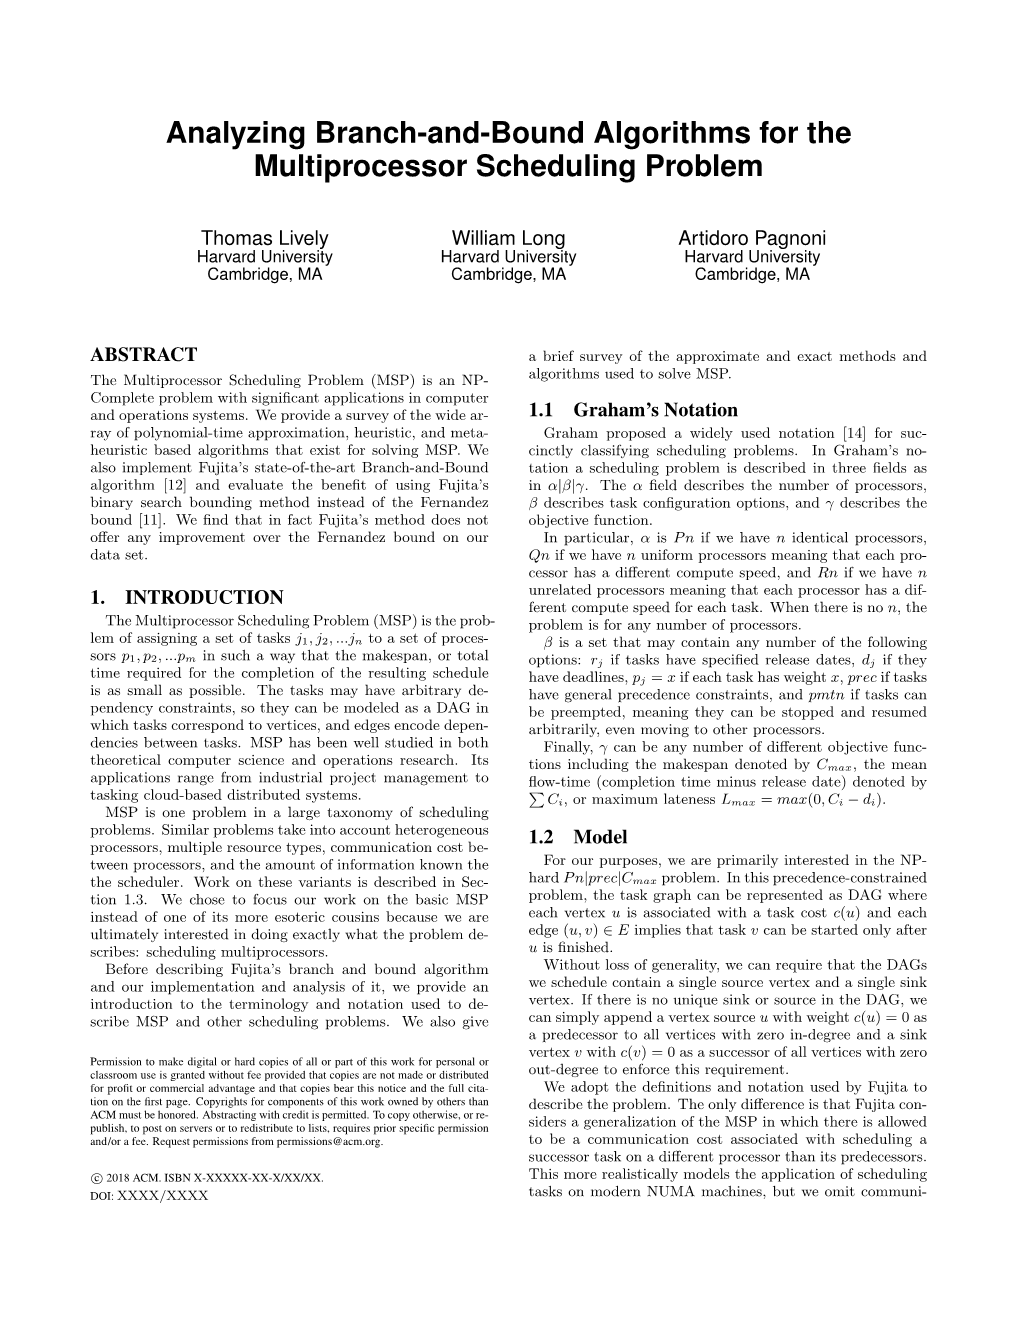 Analyzing Branch-And-Bound Algorithms for the Multiprocessor Scheduling Problem